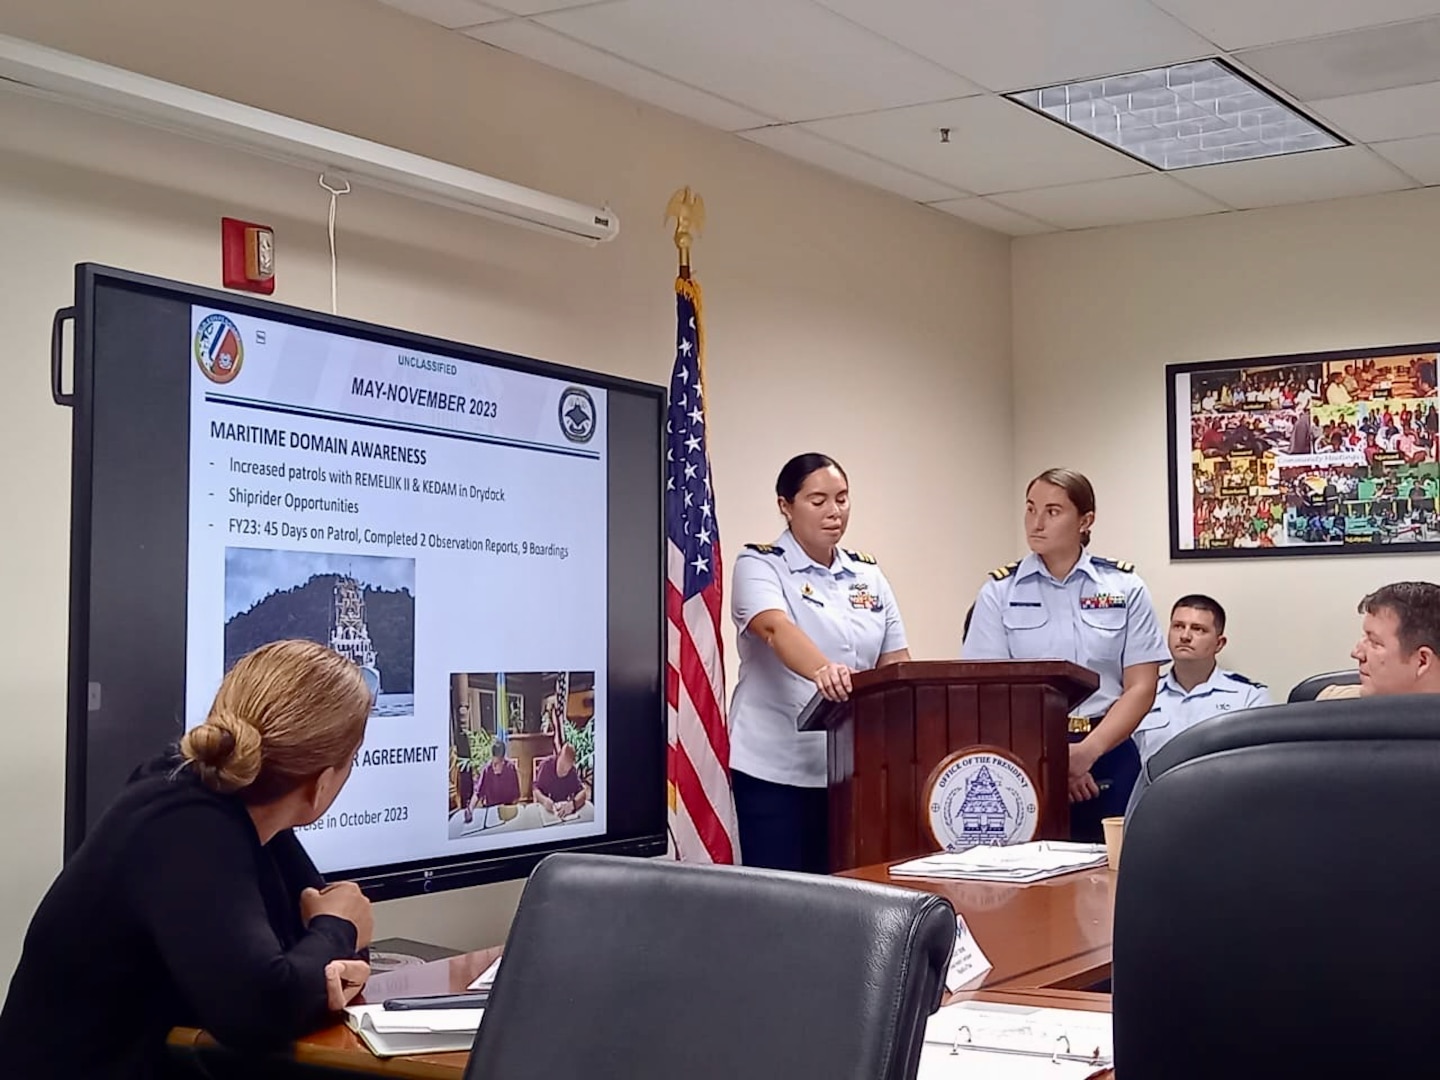 Lt. Cmdr. Christine Igisomar and Lt. Anna Vaccaro present for the U.S. Coast Guard at the Joint Committee Meeting in Koror, Palau, in November 2023. In an enduring commitment to regional stability and cooperative security, U.S. Coast Guard Forces Micronesia/Sector Guam personnel participated in a bilateral Joint Committee Meeting (JCM) with the Republic of Palau, alongside U.S. Indo-Pacific Command (INDOPACOM) and the U.S. Department of State representatives in Palau from Nov. 14-17, 2023. (U.S. Coast Guard photo)